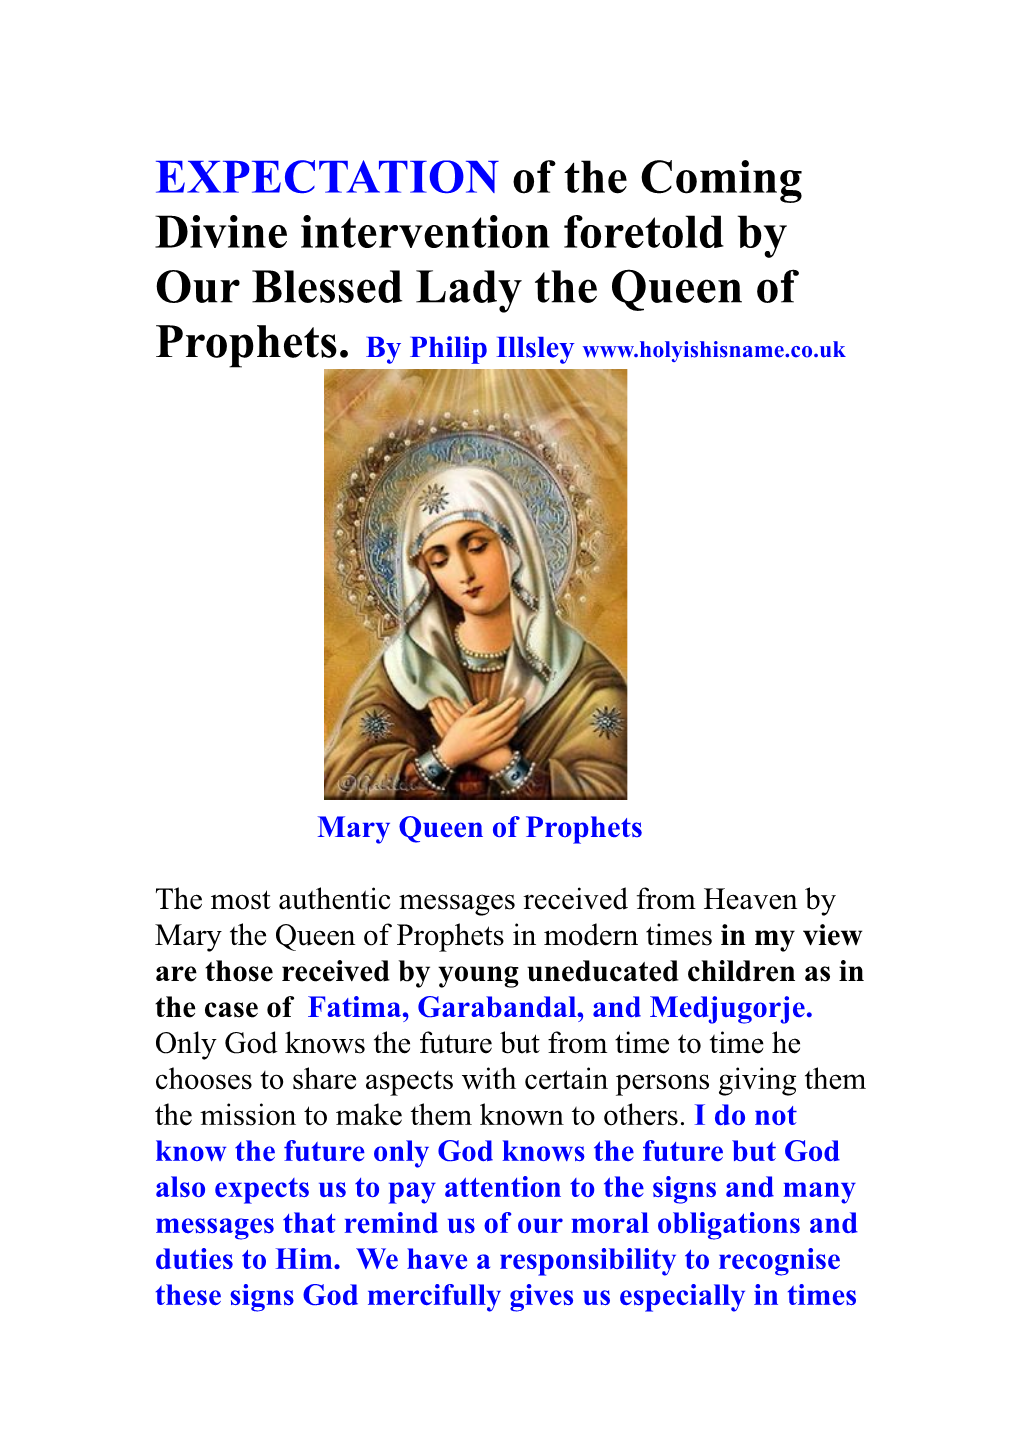 EXPECTATION of the Coming Divine Intervention Foretold by Our Blessed Lady the Queen of Prophets